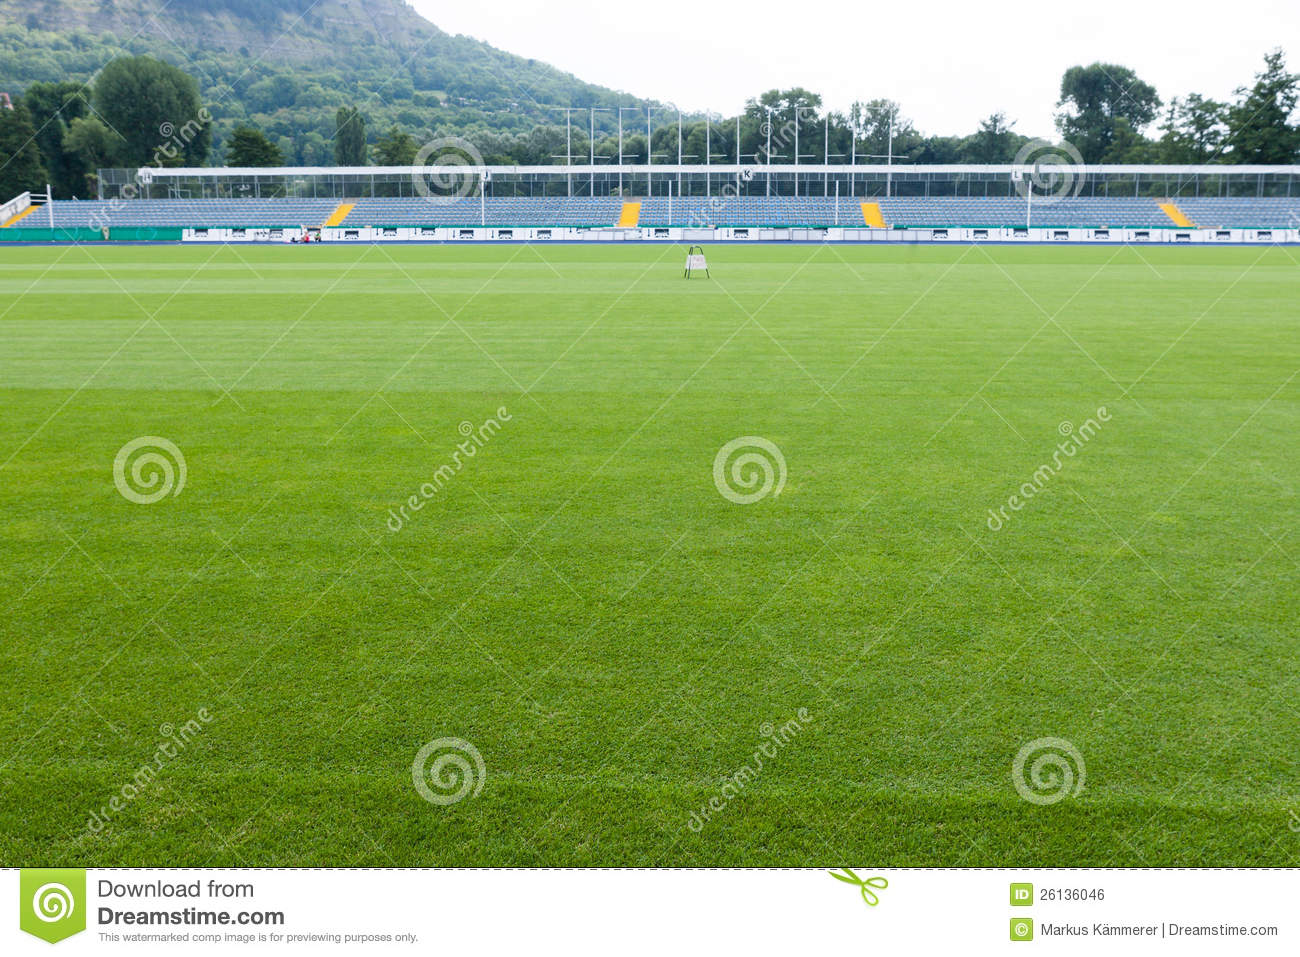 With A Manicured Green Grass Pitch And Sportsfield In Front Of It